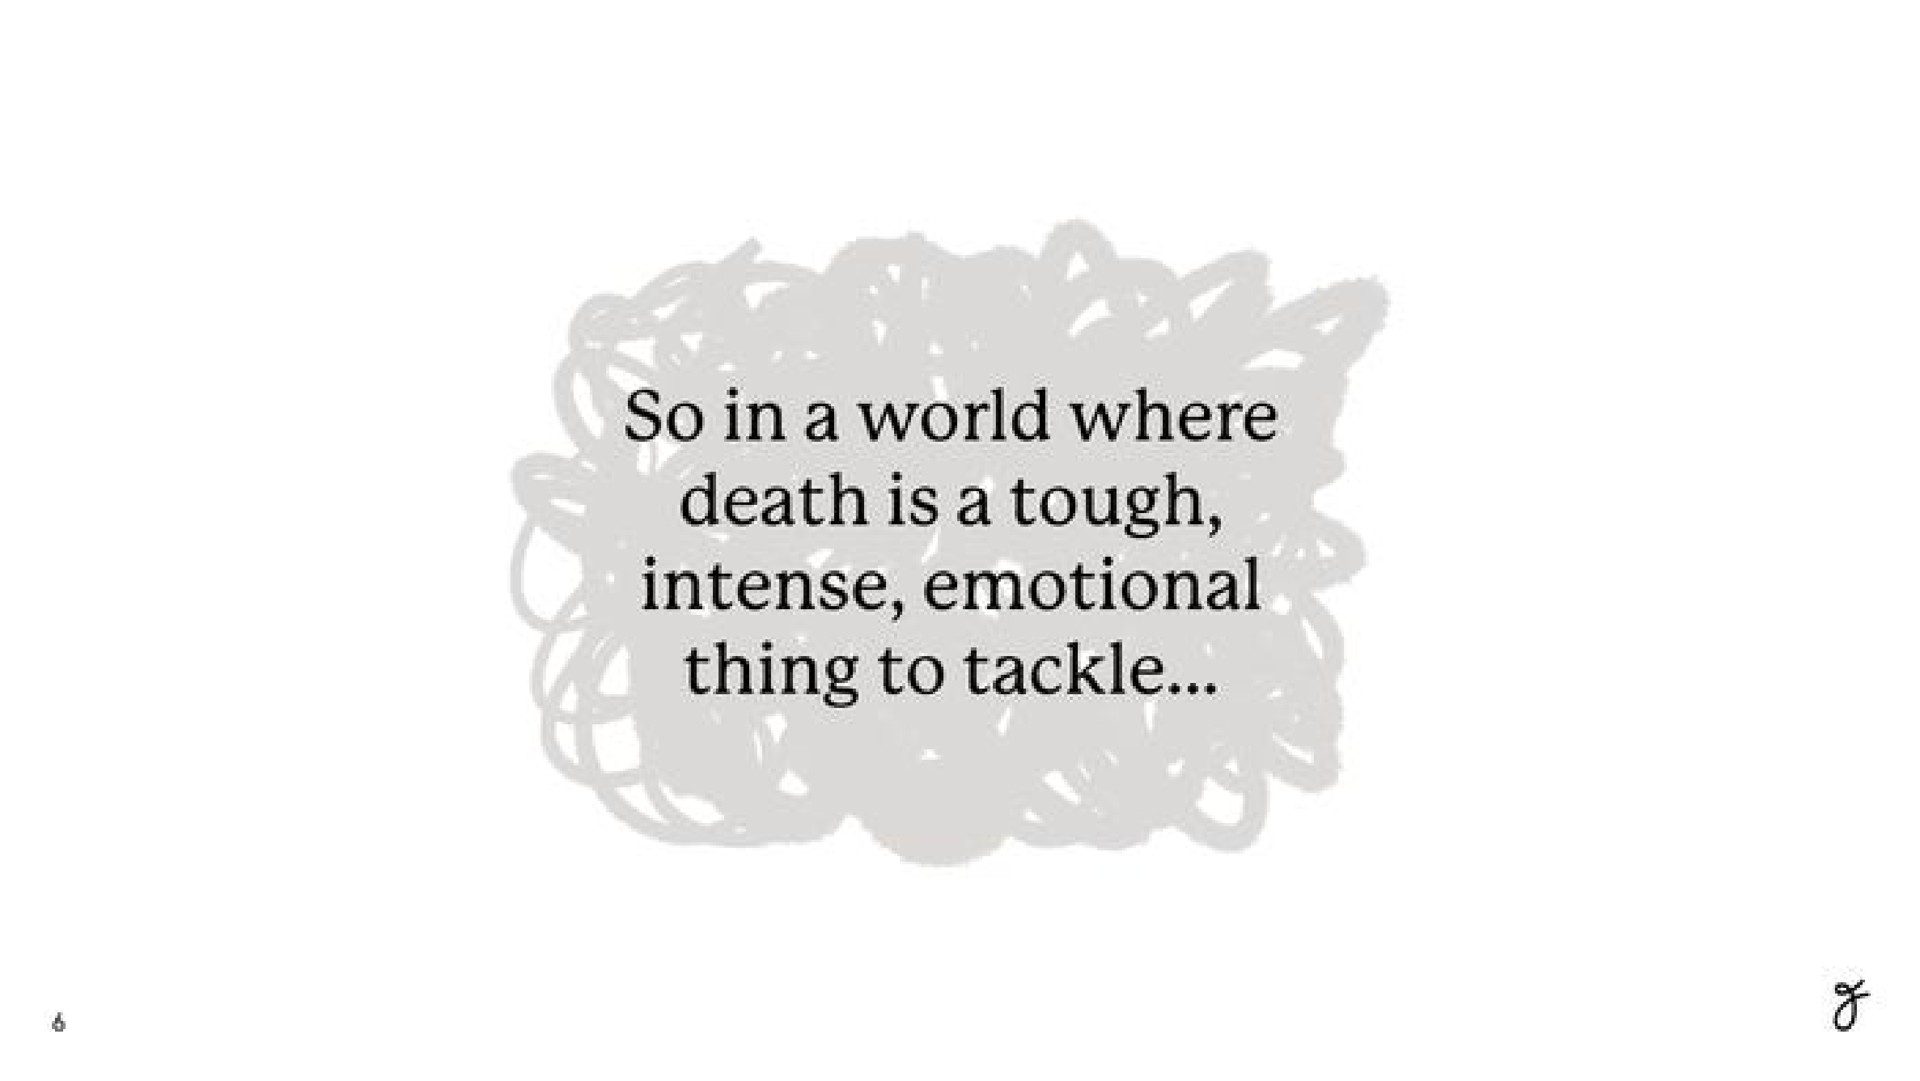 so world where death is a tough intense emotional thing to tackle | Farewill